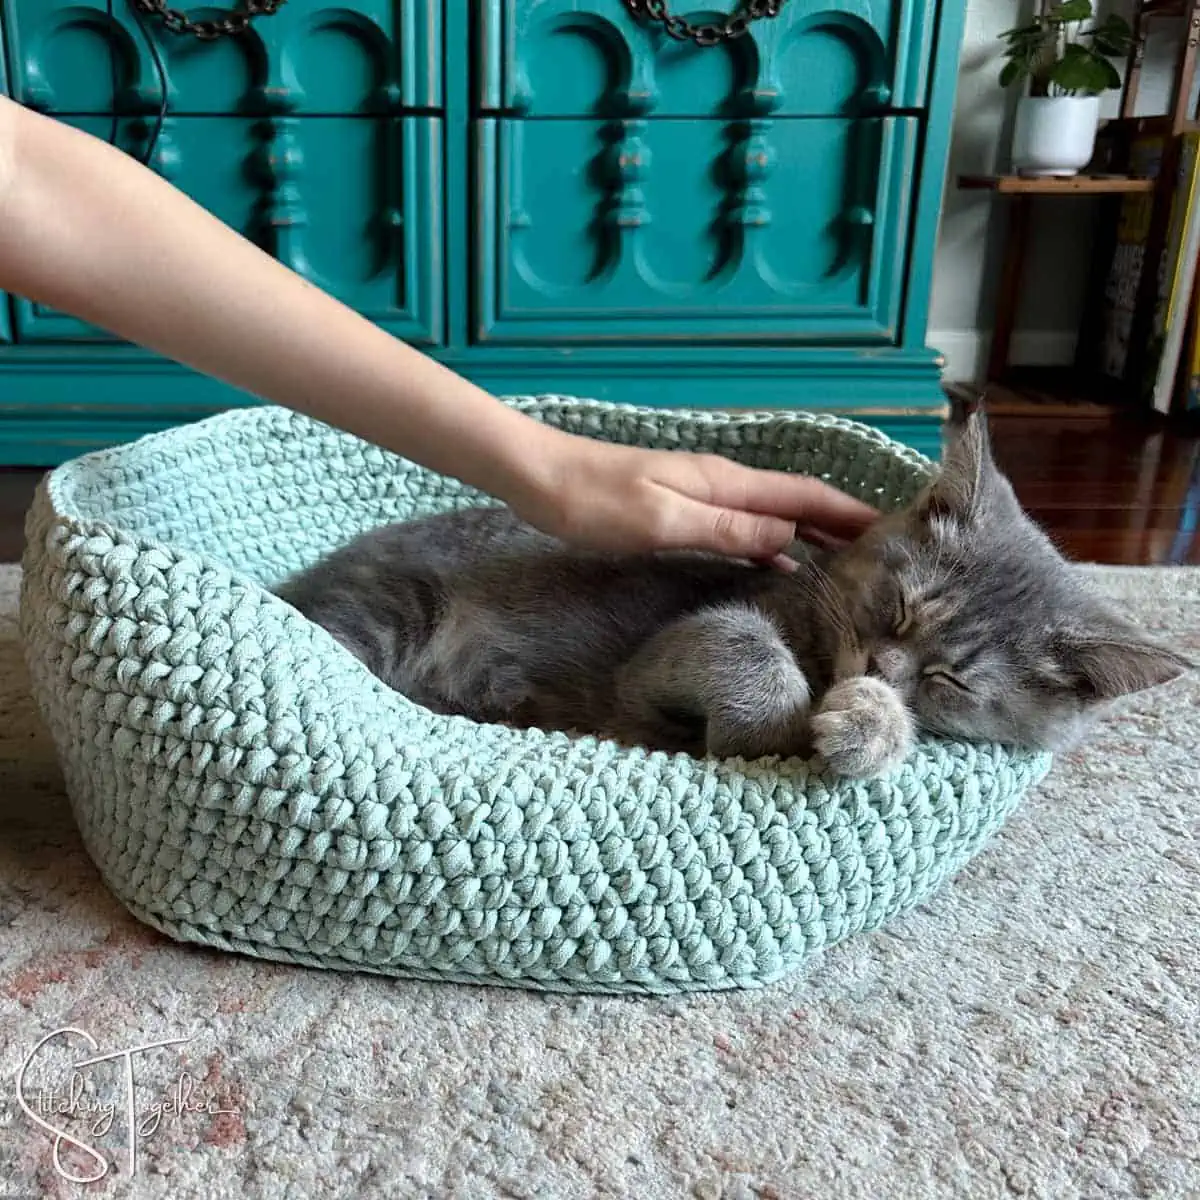 child's hand petting a sleeping kitten in a cat bed